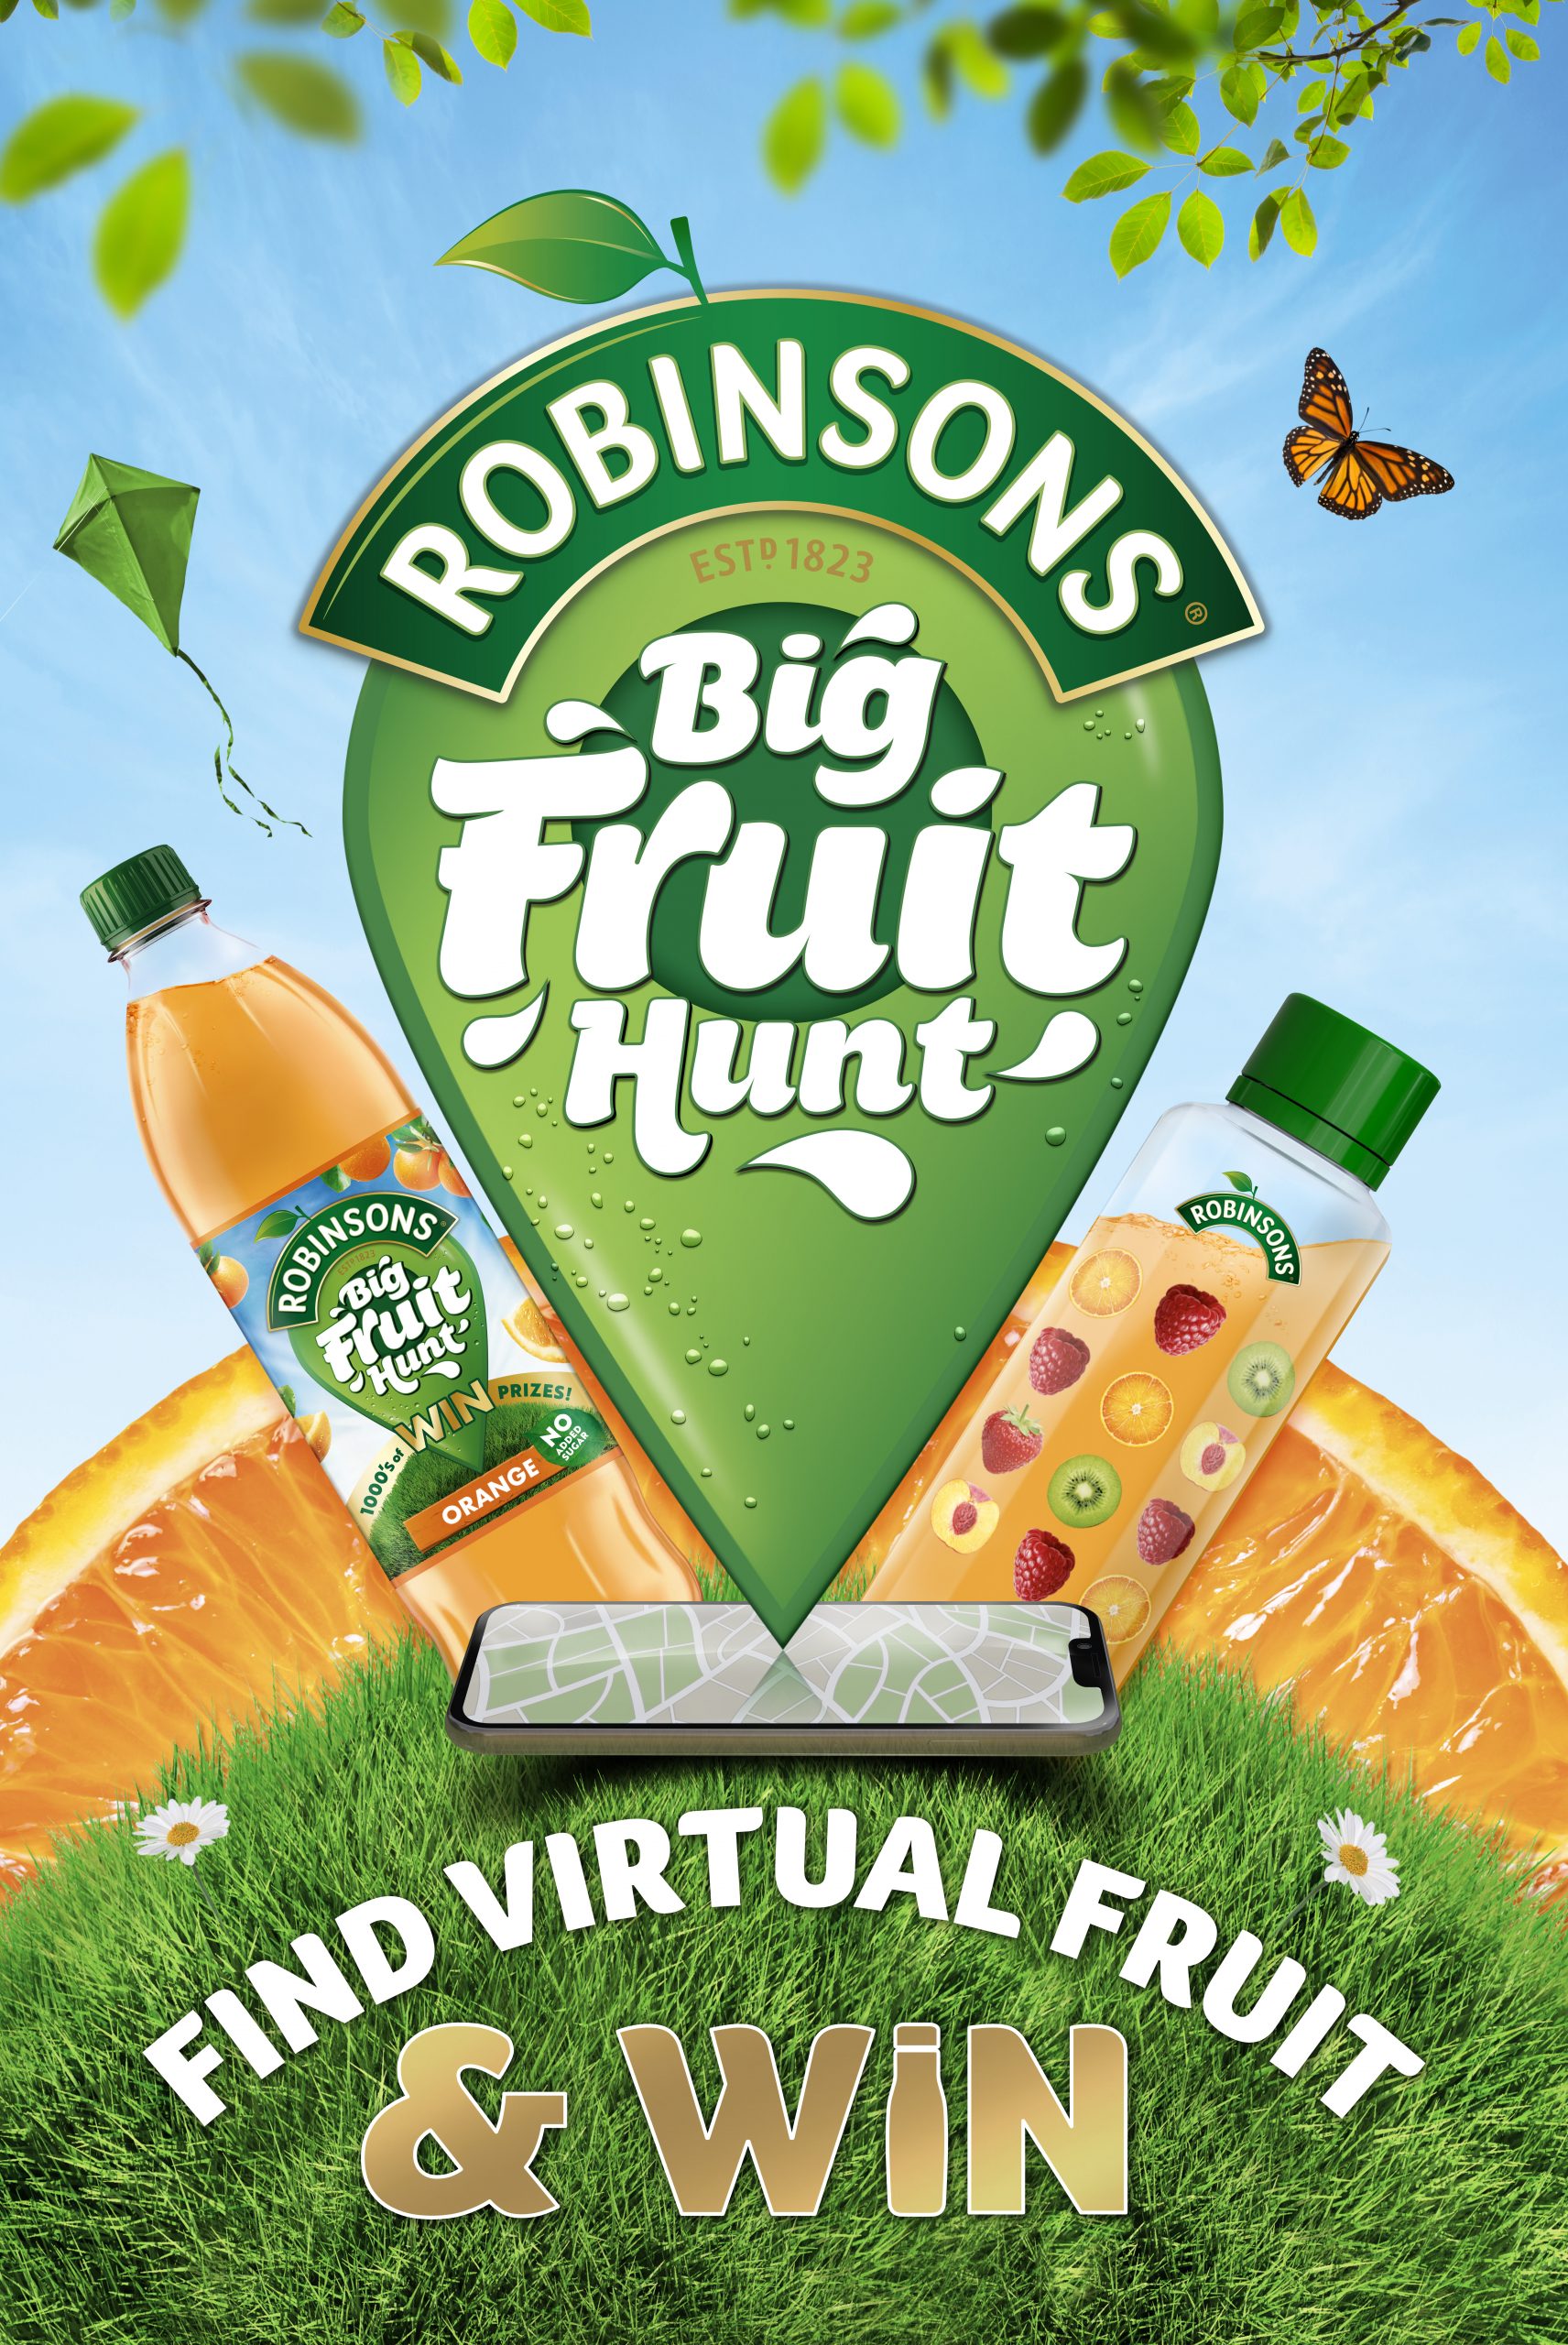 Robinsons gets ready for summer with the ‘Big Fruit Hunt’